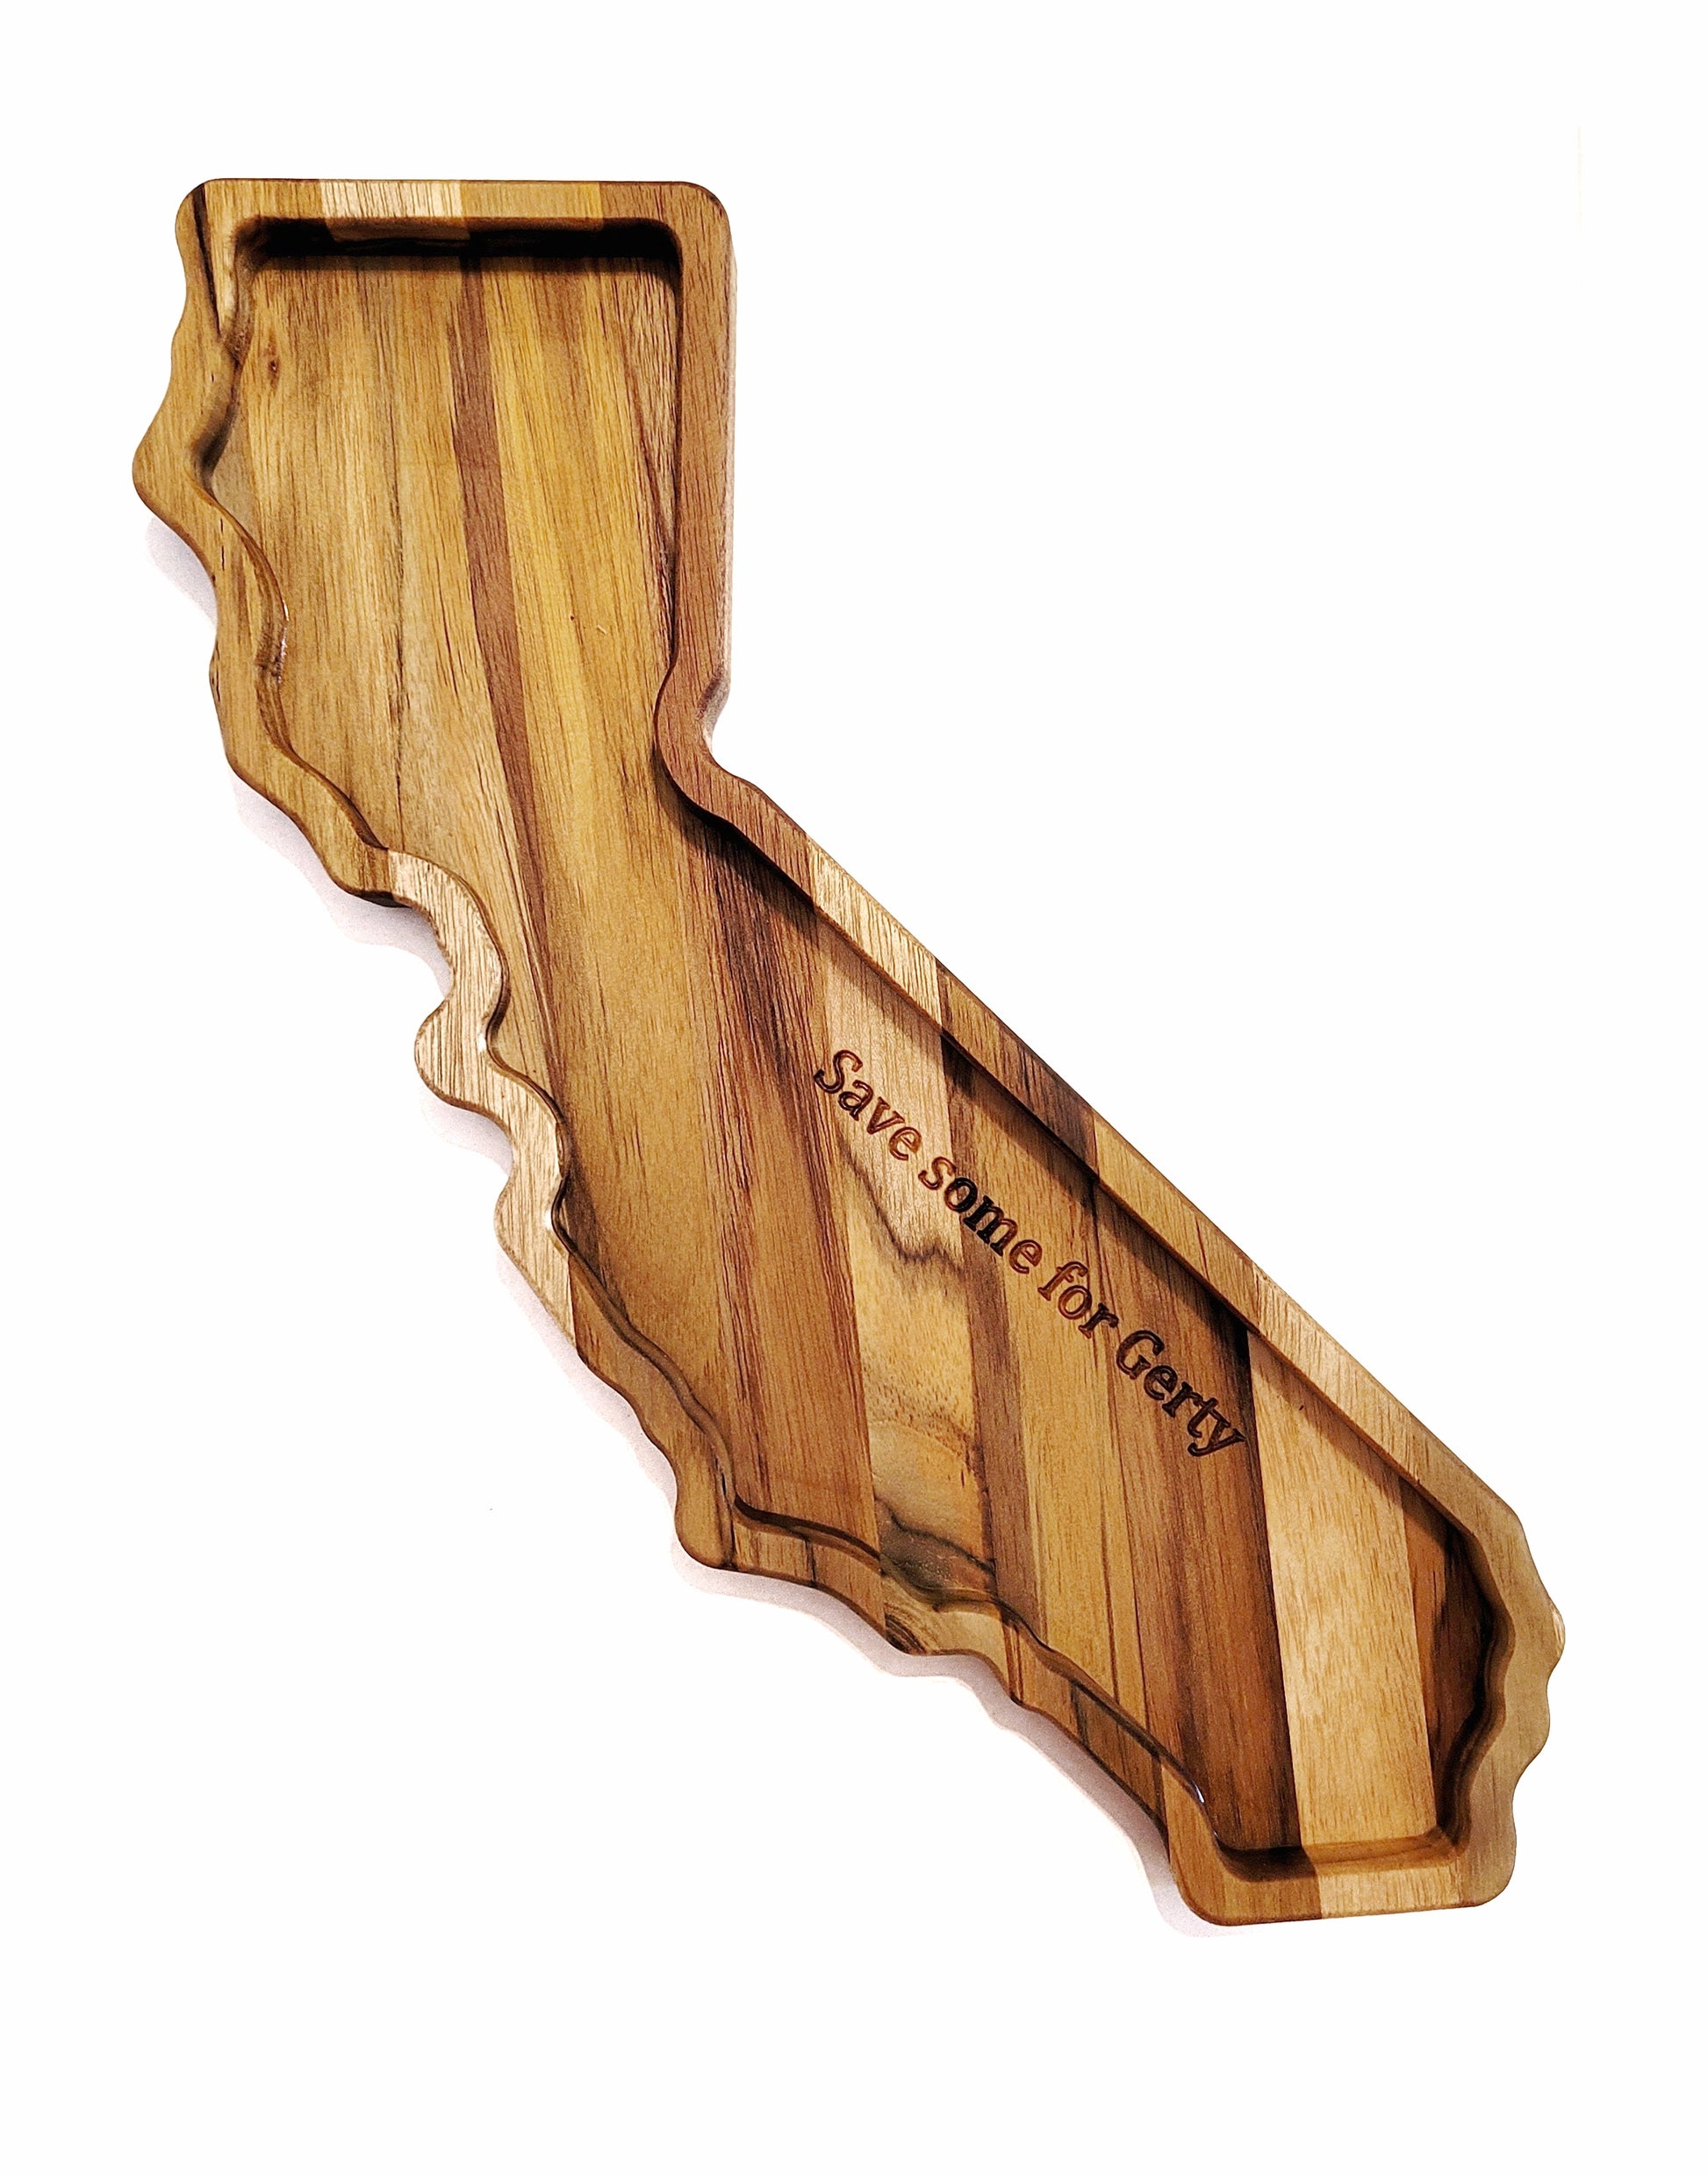 California shaped teak charcuterie board personalized with a funny message 